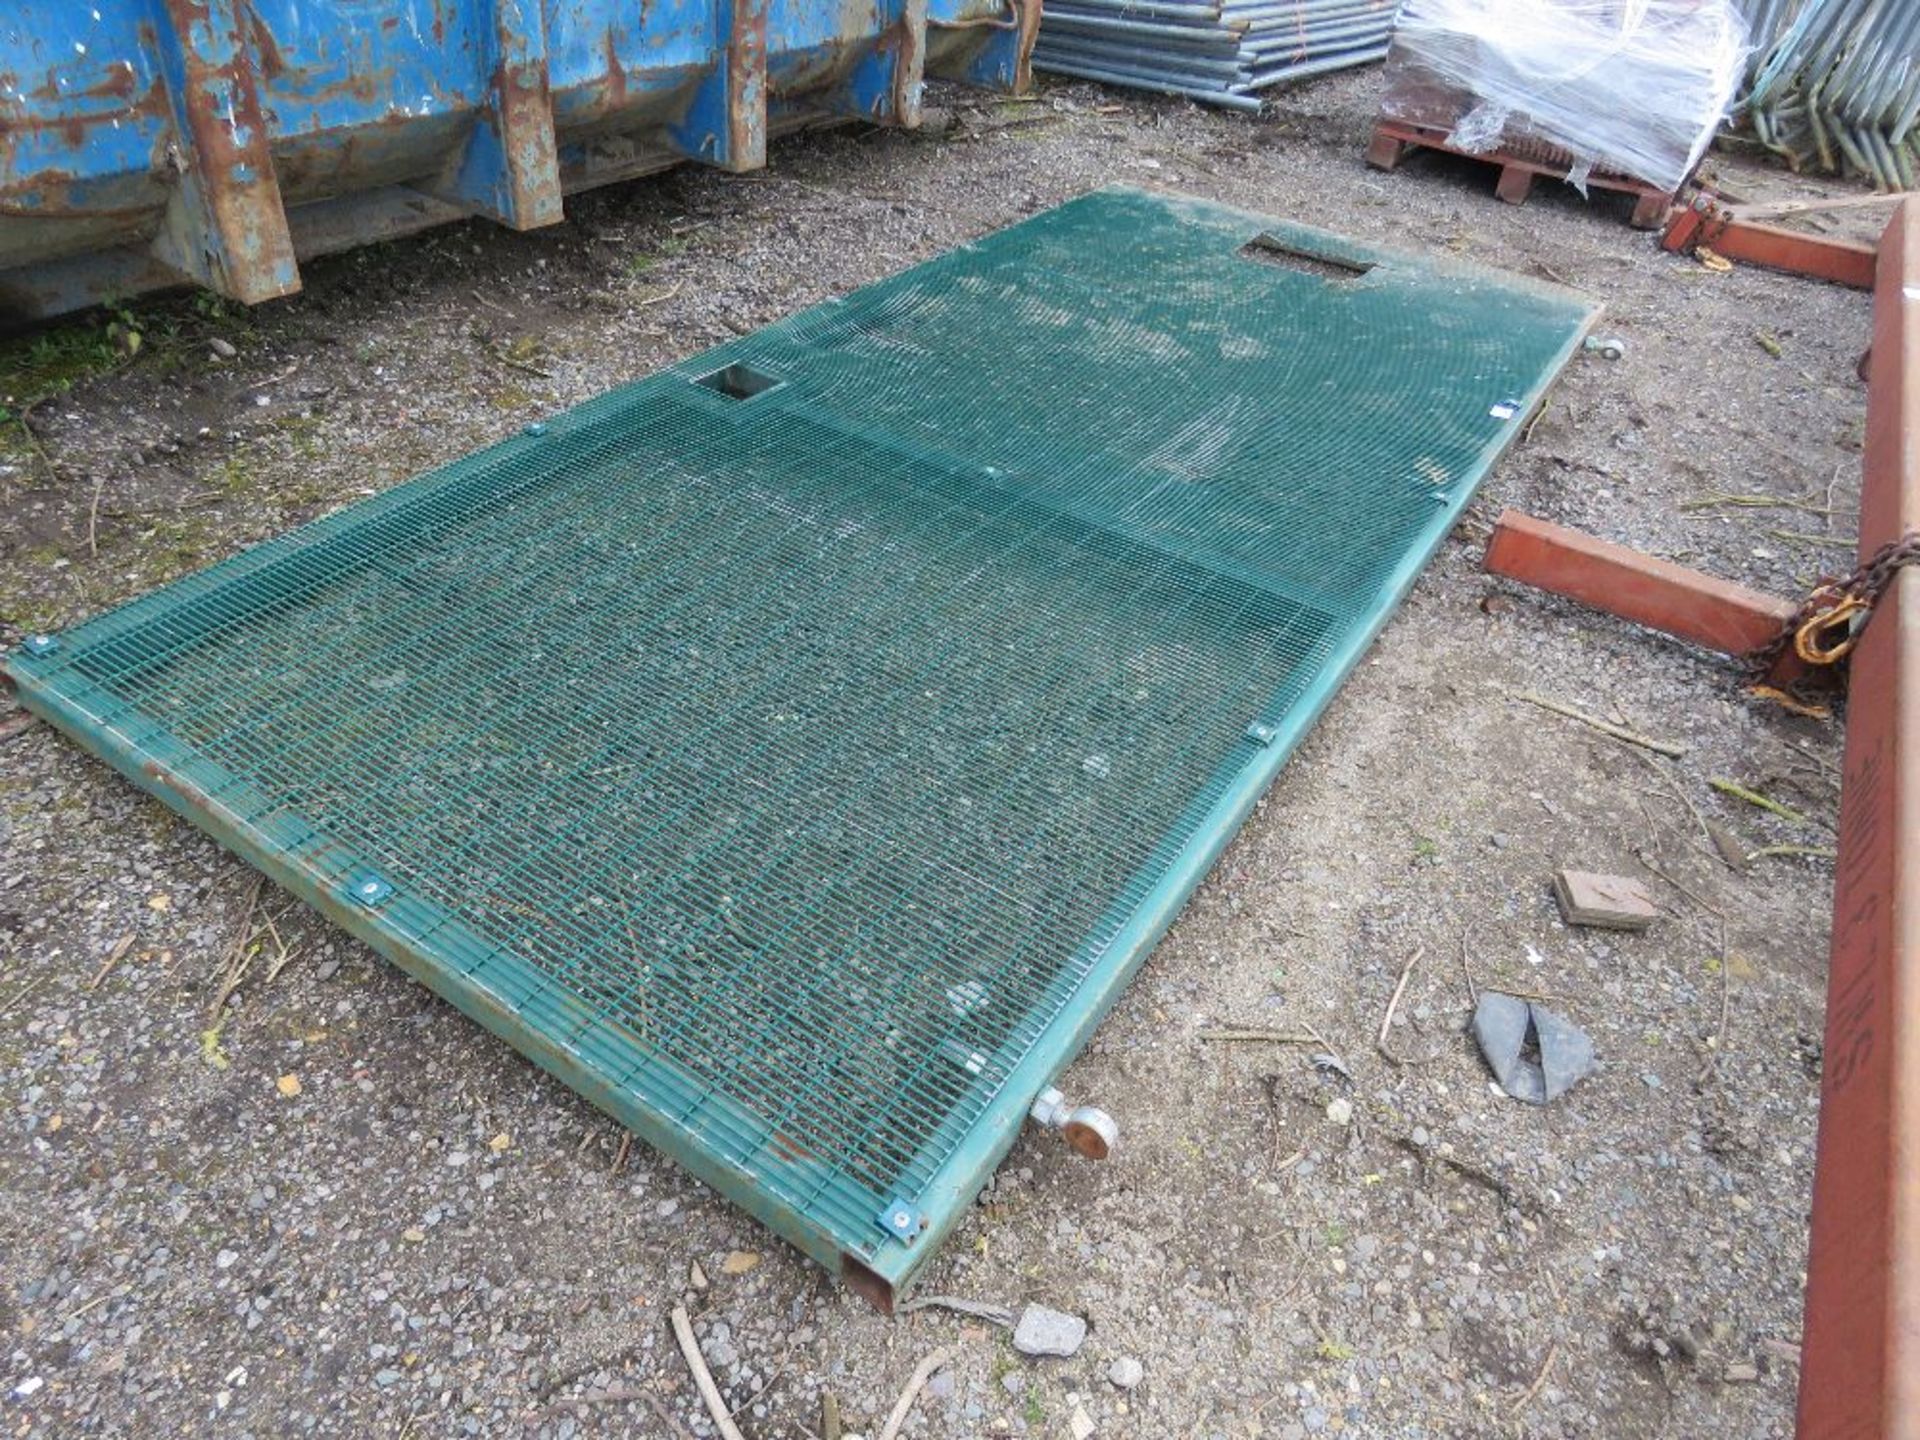 GREEN MESH SIDED GATE 5FT X 10FT6" APPROX.....THIS LOT IS SOLD UNDER THE AUCTIONEERS MARGIN SCHEME,